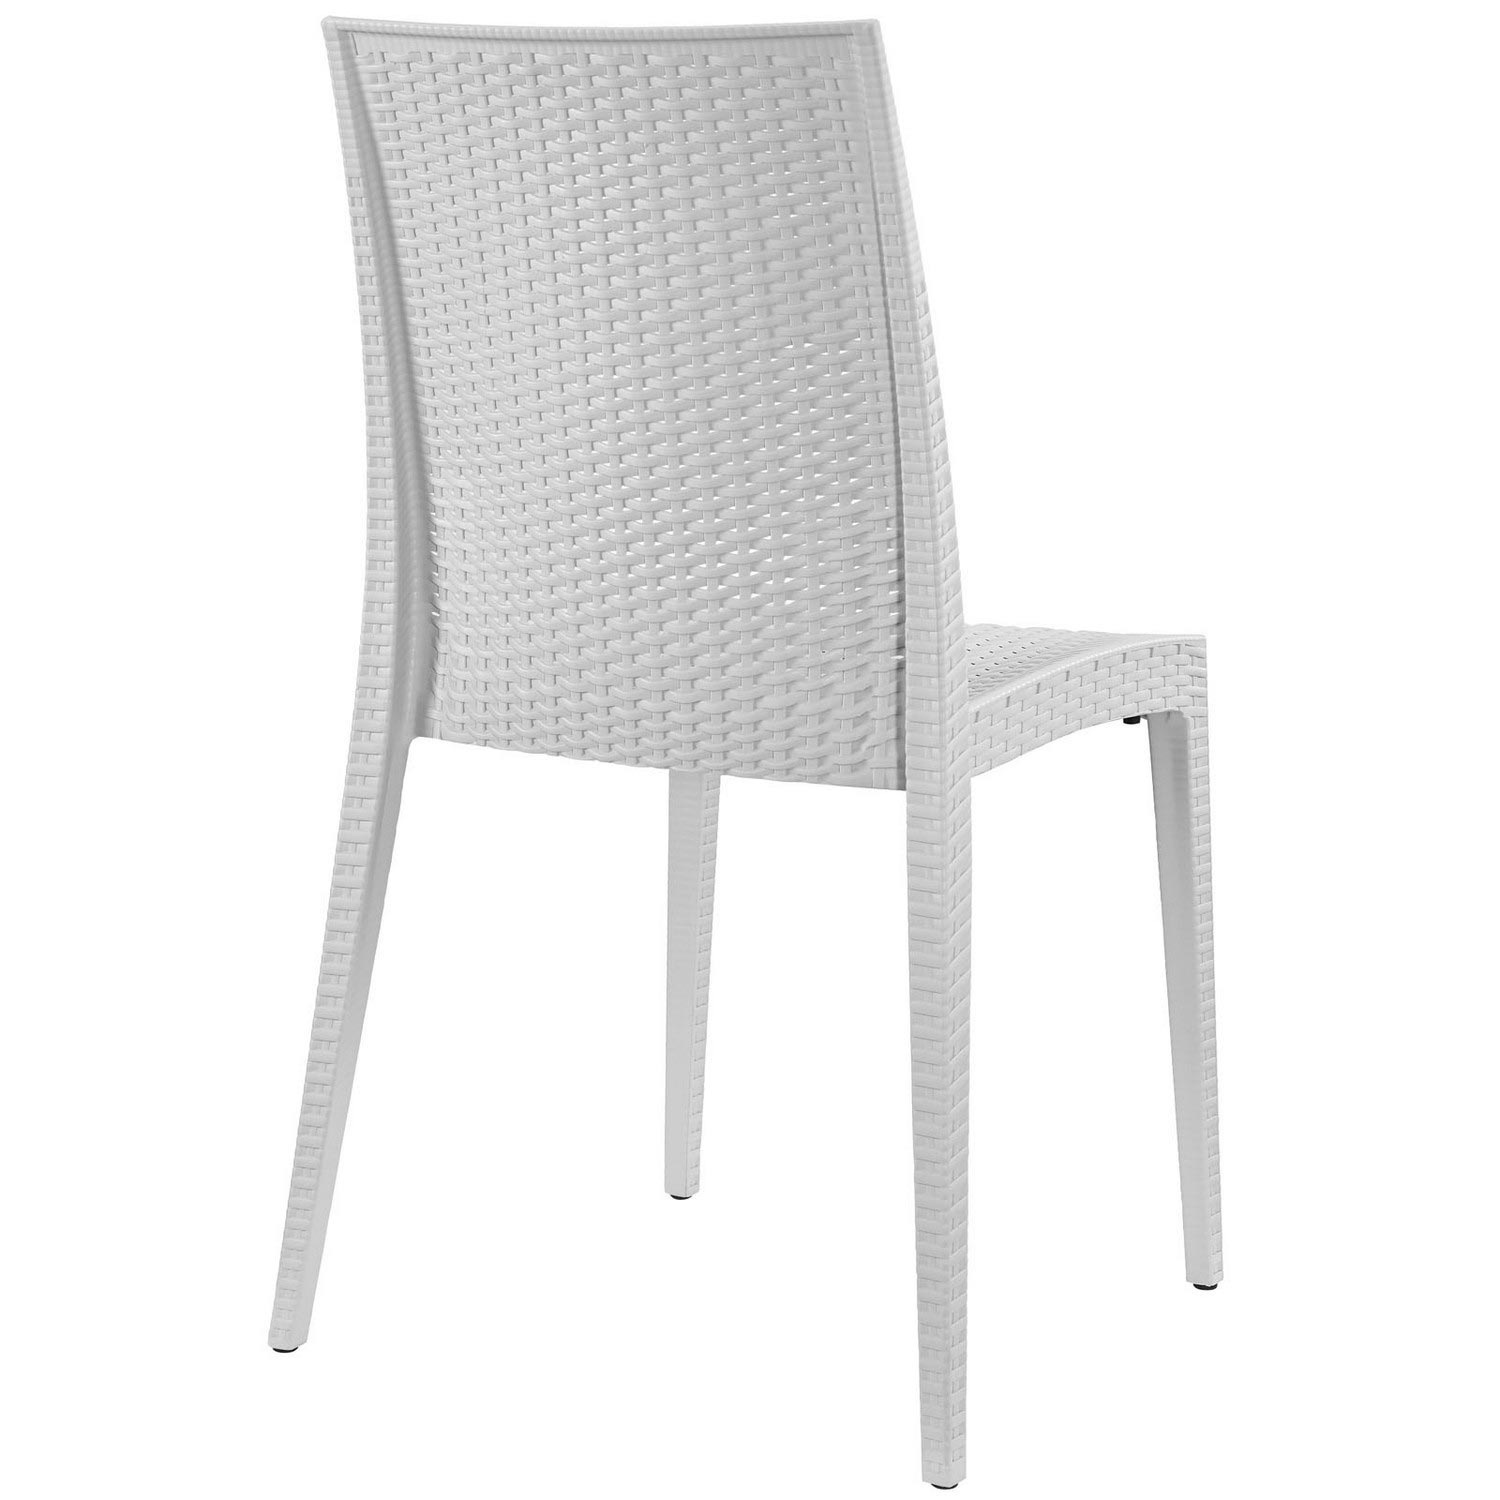 Modway Intrepid Dining Side Chair - Gray